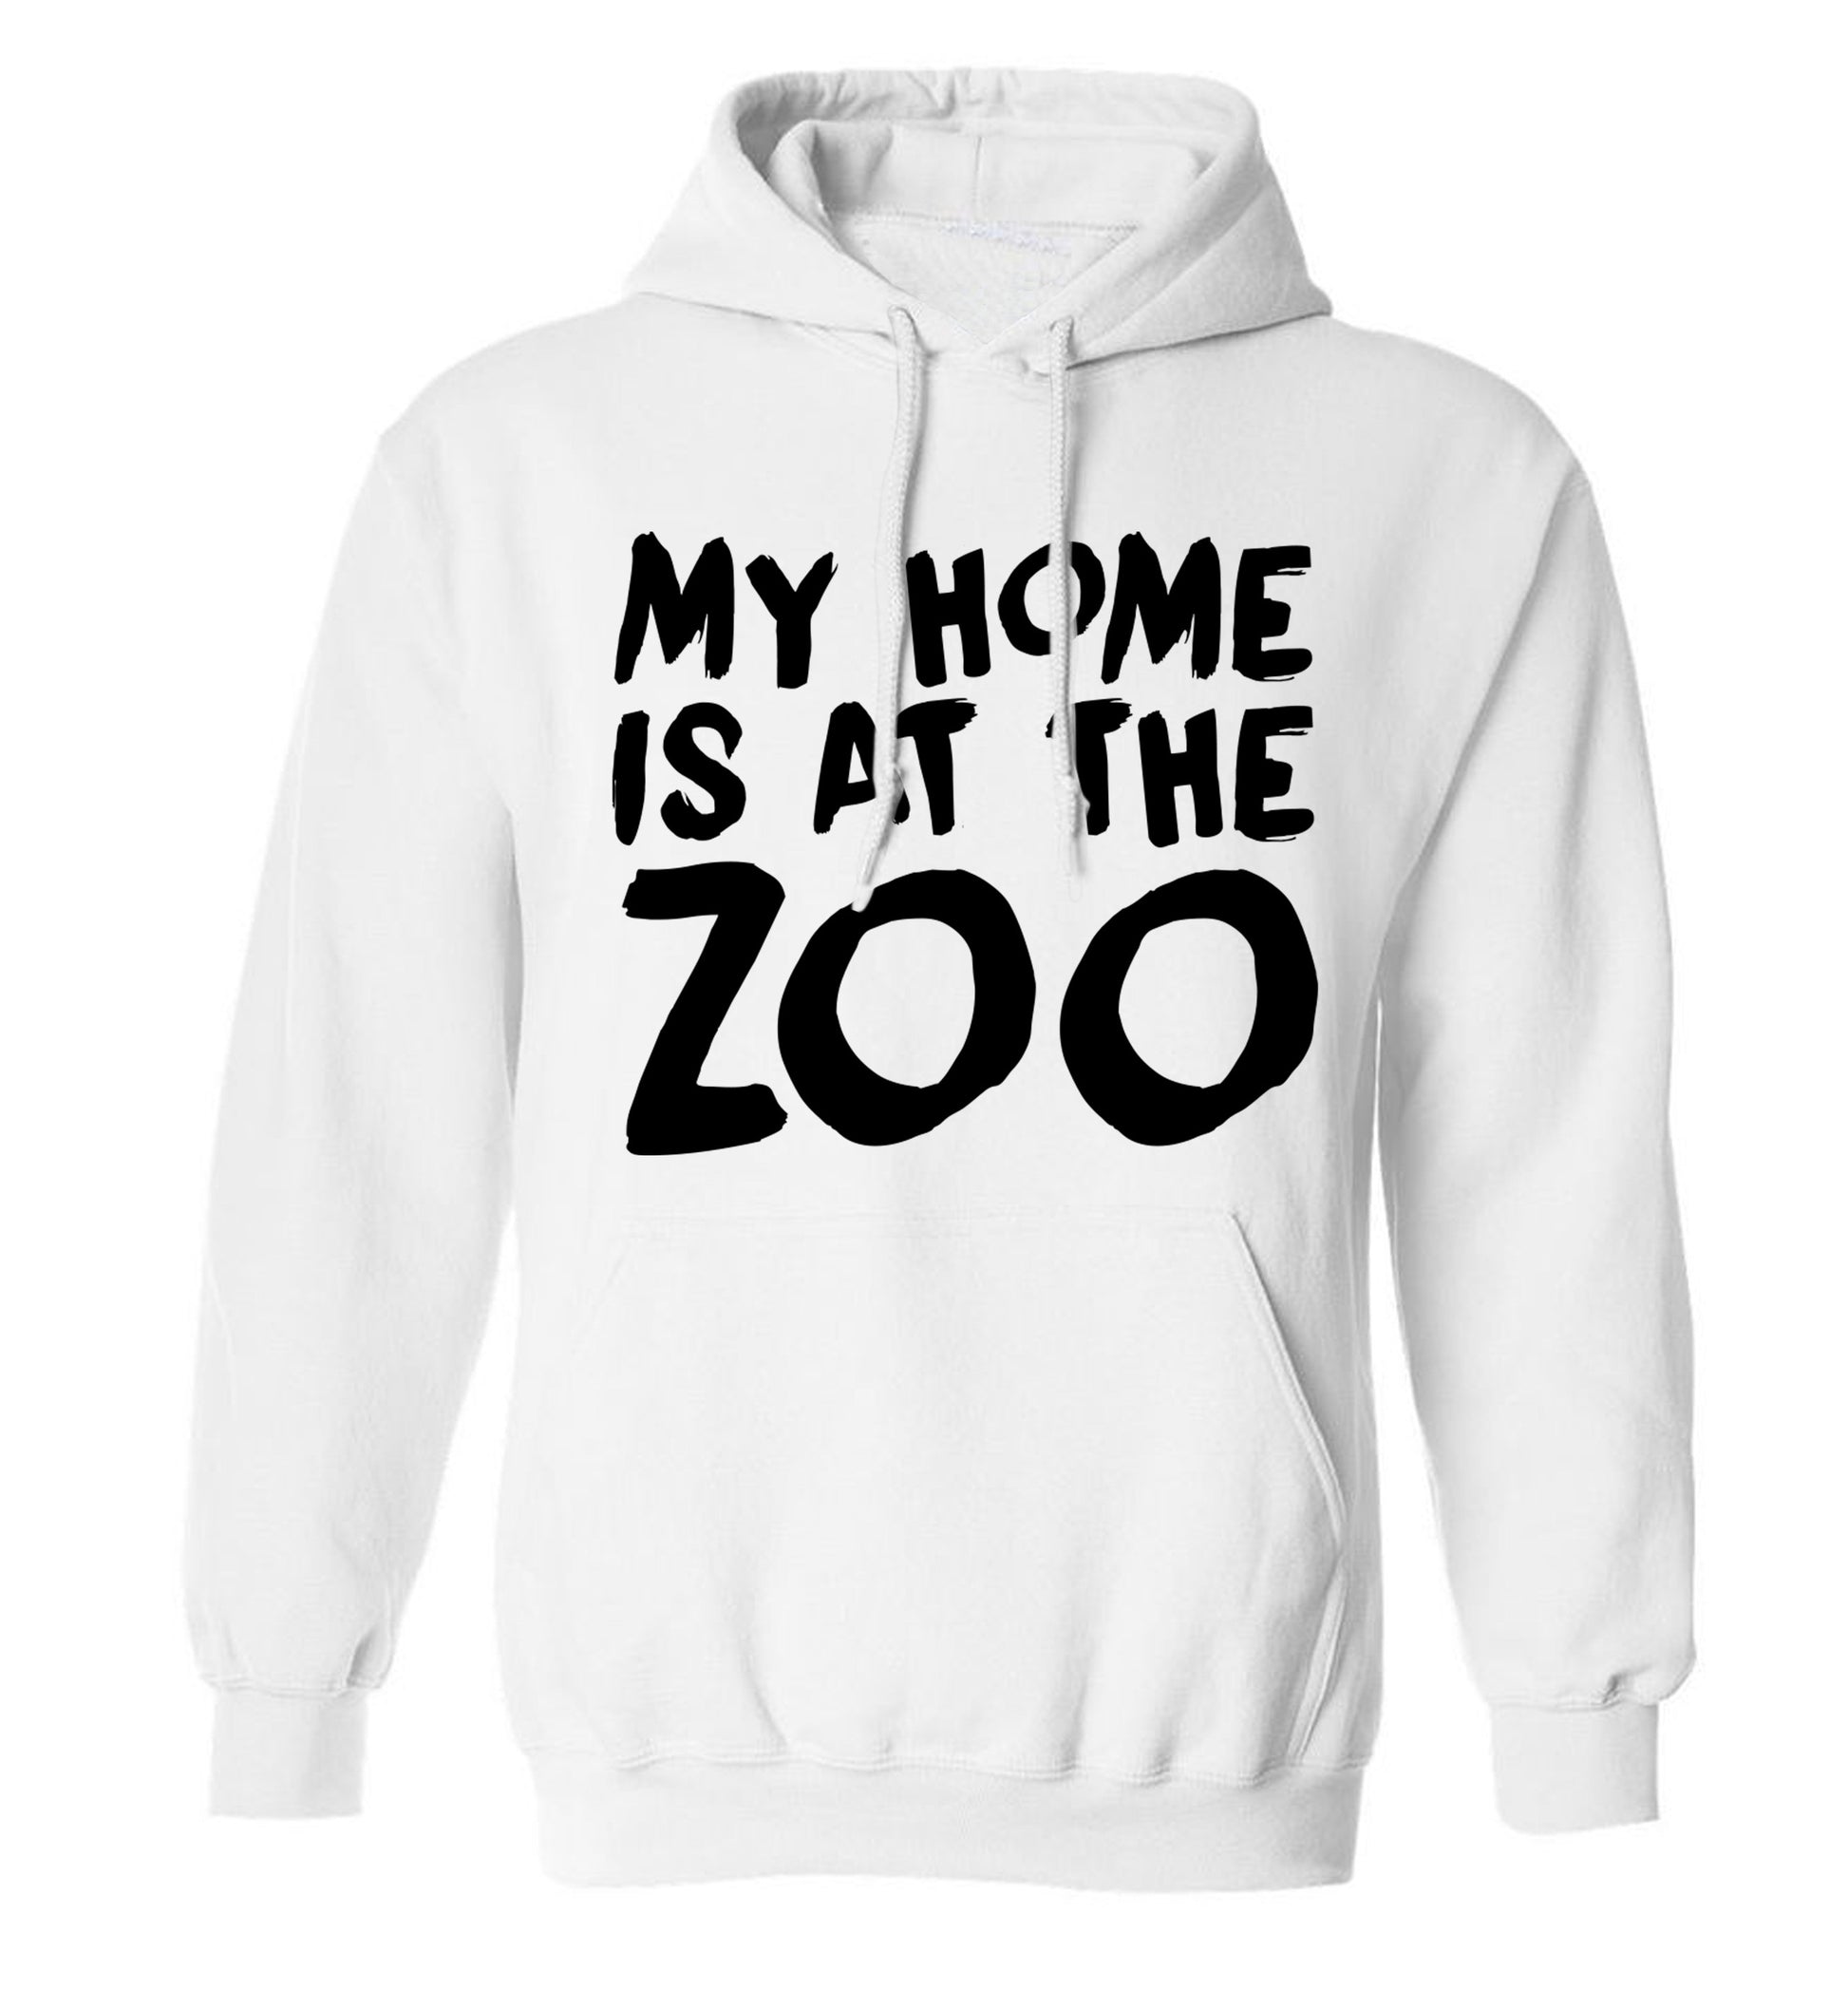 My home is at the zoo adults unisex white hoodie 2XL